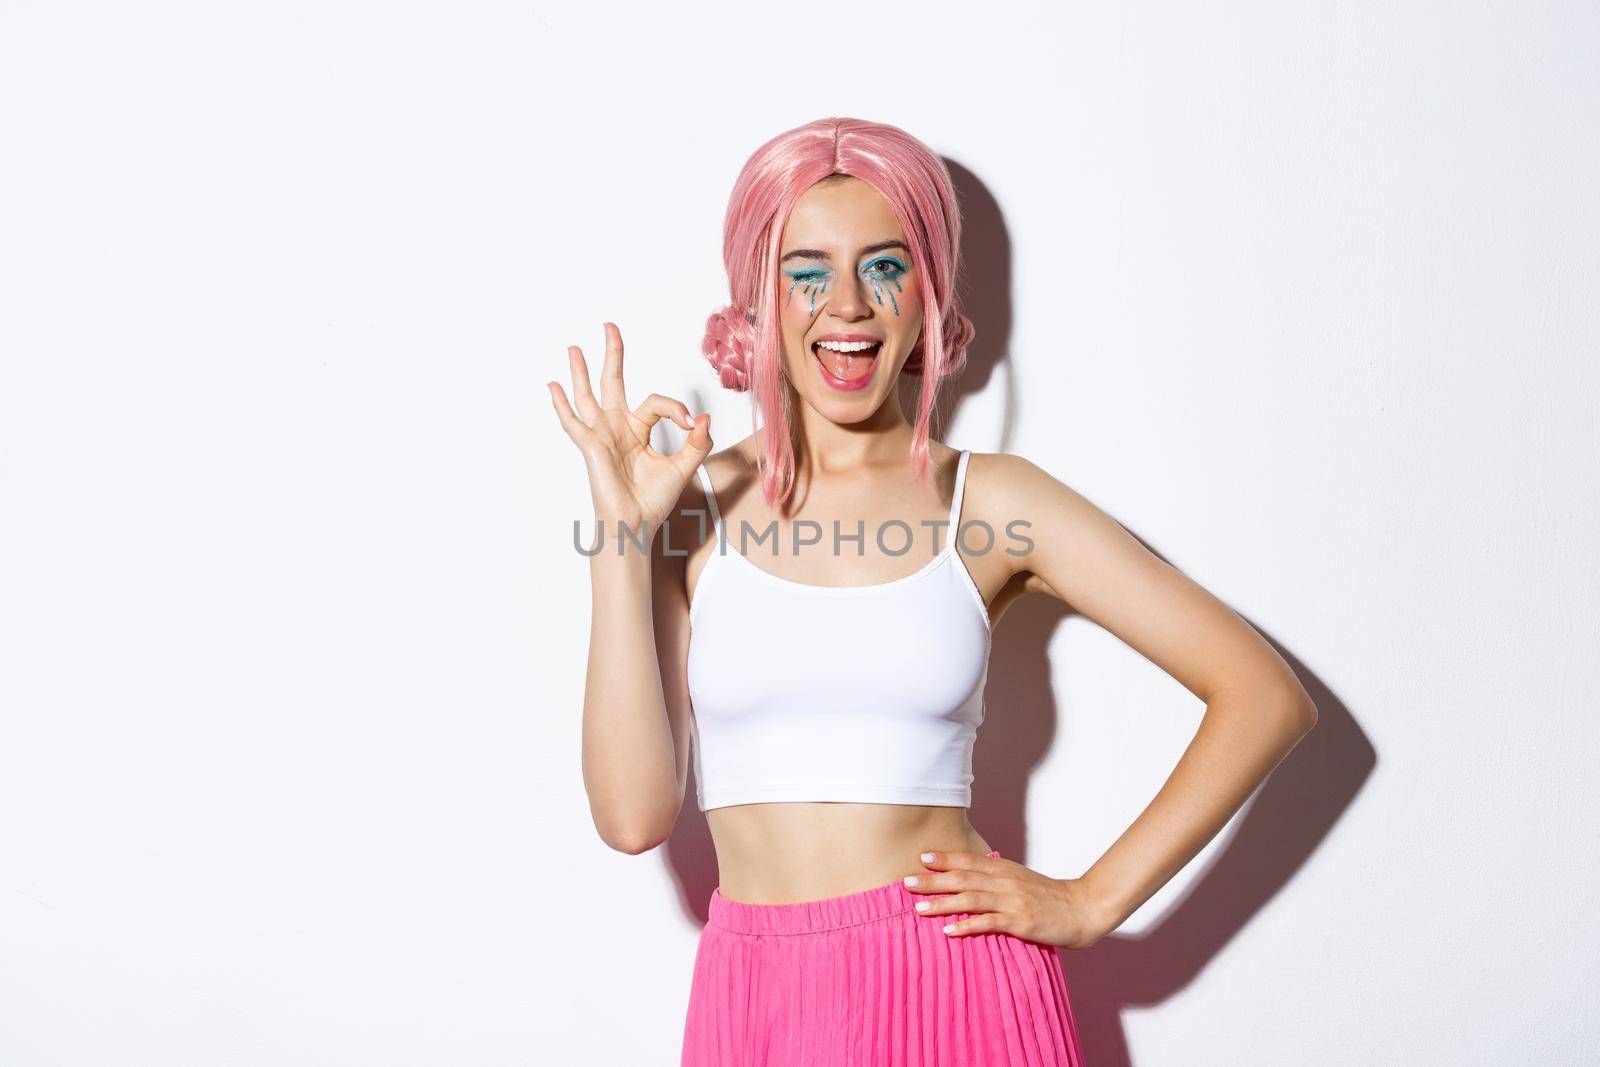 Beautiful cheeky girl in halloween costume and pink wig, showing okay sign in approval and winking, assure or recommend something, standing over white background.